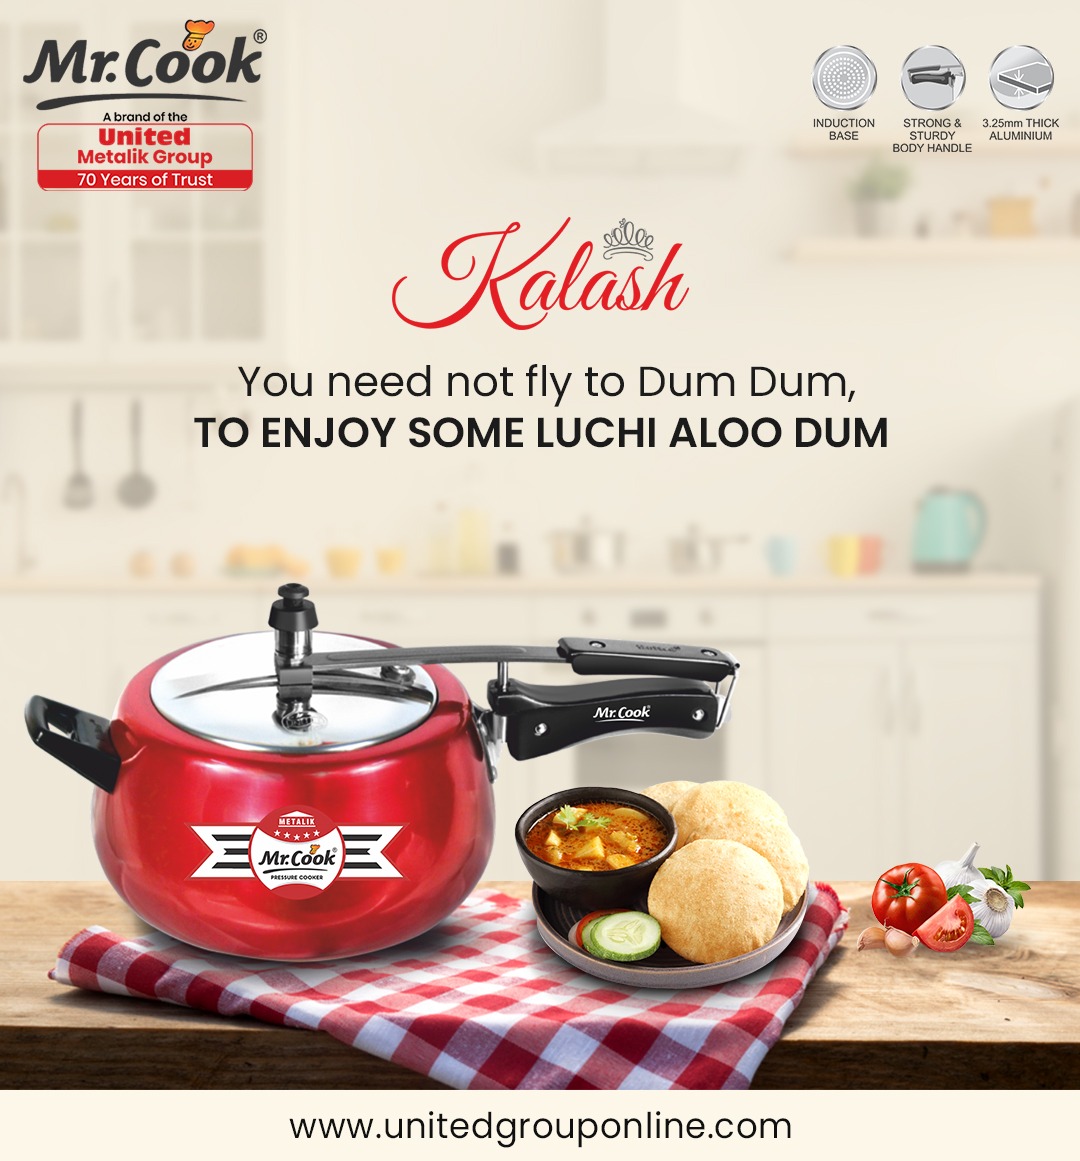 You need not fly to Dum Dum , To enjoy some luchi aloo Dum. 
. 
. 
.  #mrcook #Cookers #Cookware #PressureCookers #HealthyCooking #Deep #roundedkadai #RoundedTawa #Wok #Stwe #Pot #StainlessSteel #Durable #Reliable #PremiumQuality #Tastyfood #Chefchoice #Qualityproduct